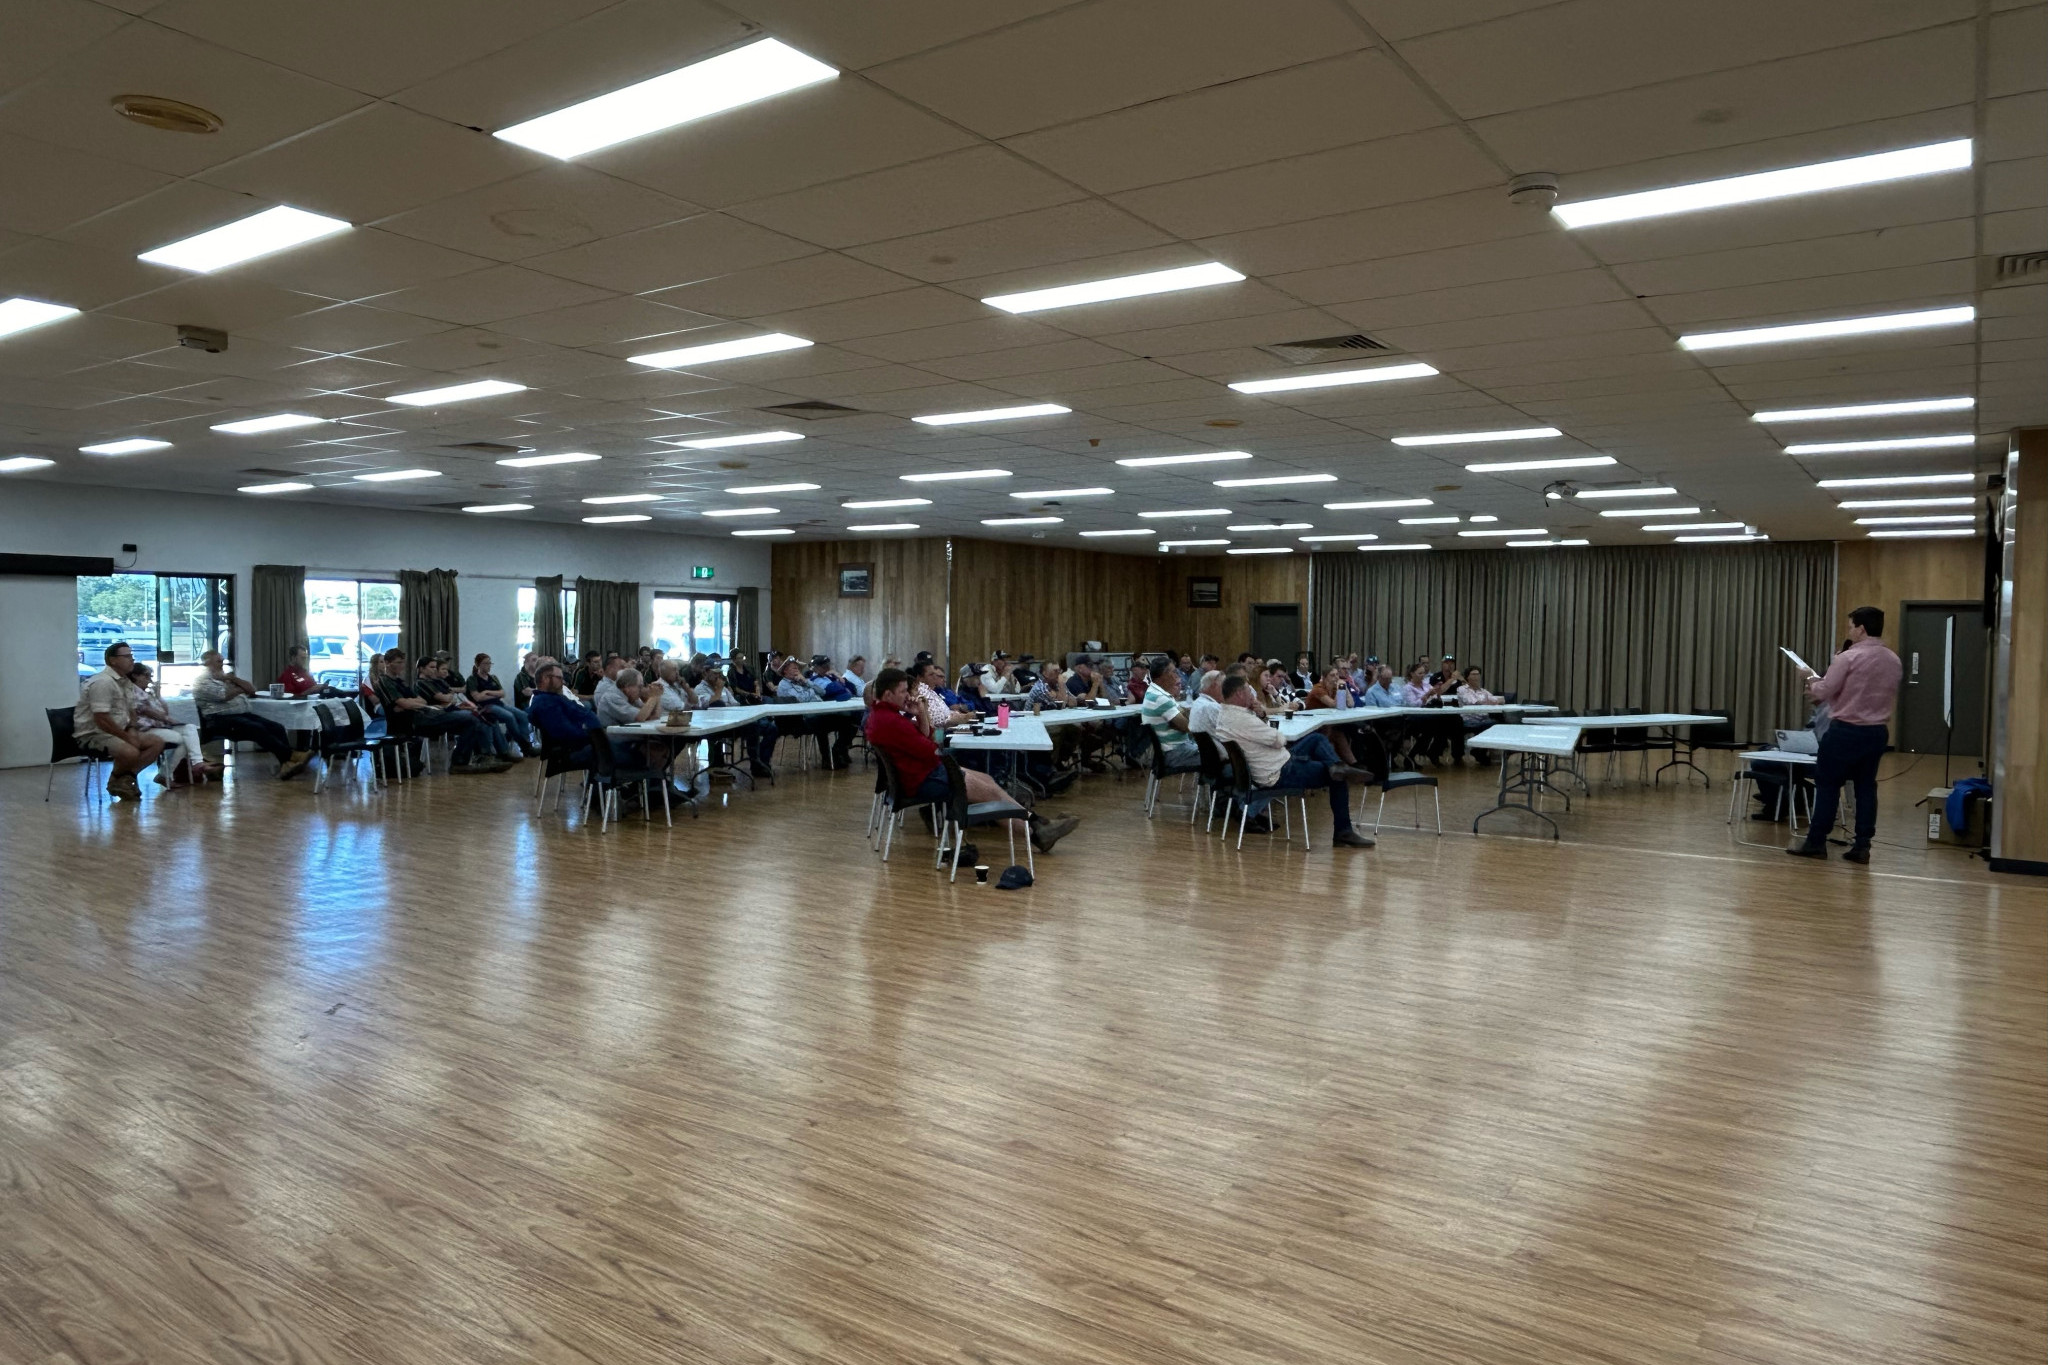 Tooraweenah Prime Lamb hosted an information day for all lamb and sheep producers in Dubbo on Thursday, March 14. Photos supplied.